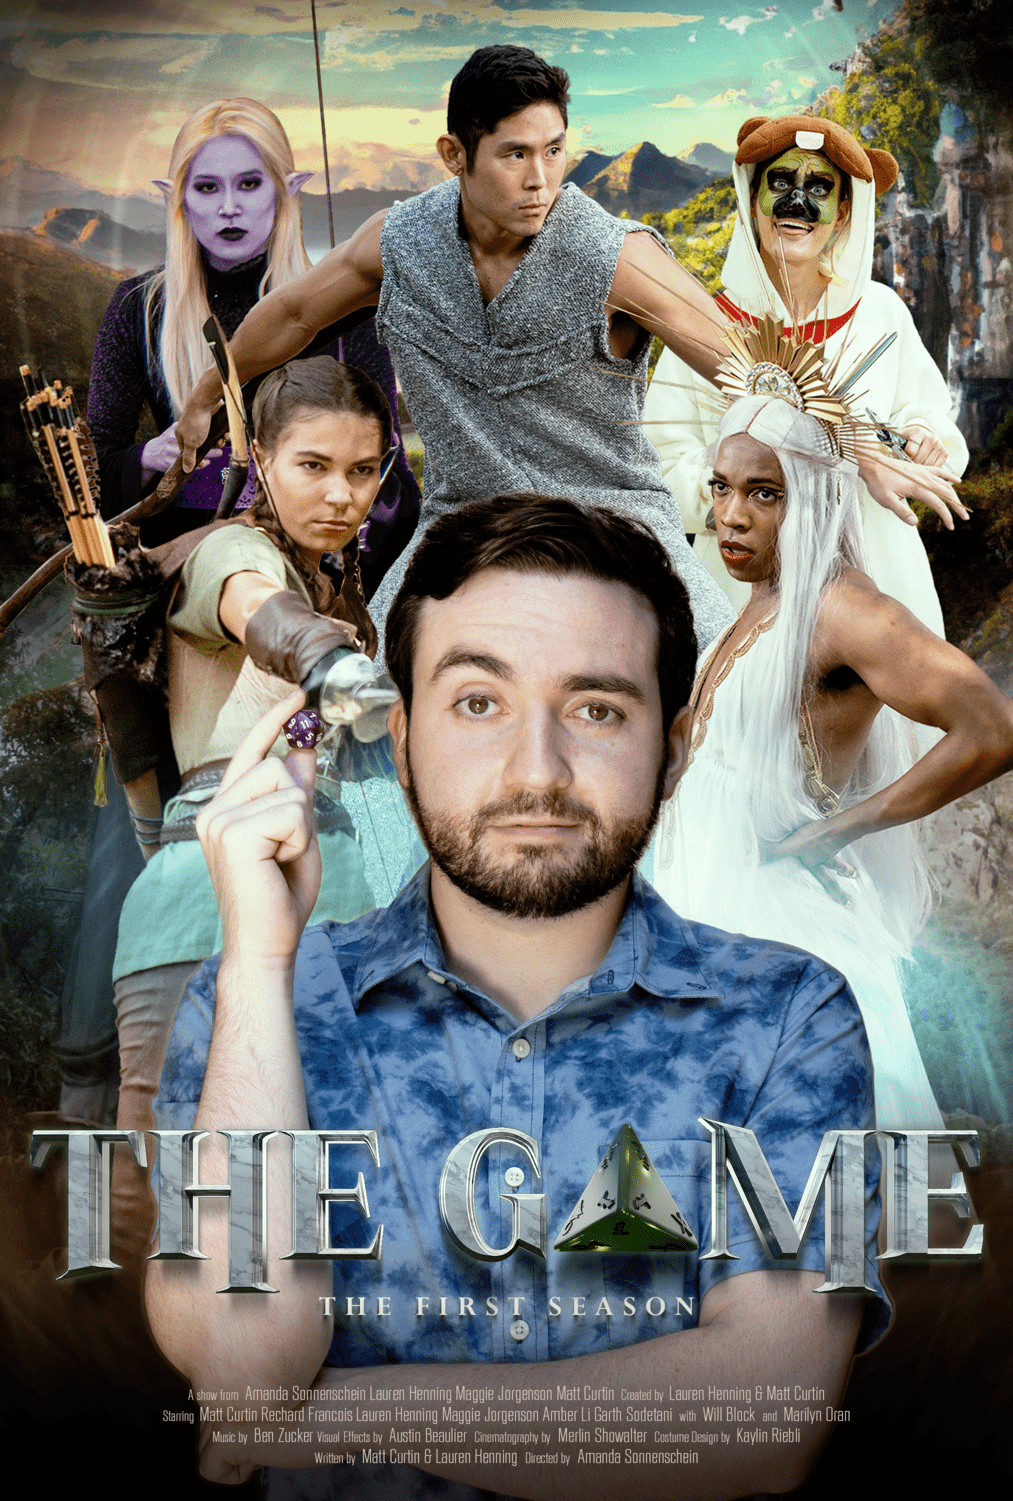 Trailer Released from Upcoming Tabletop Role-playing
Game-Themed Series “The Game”